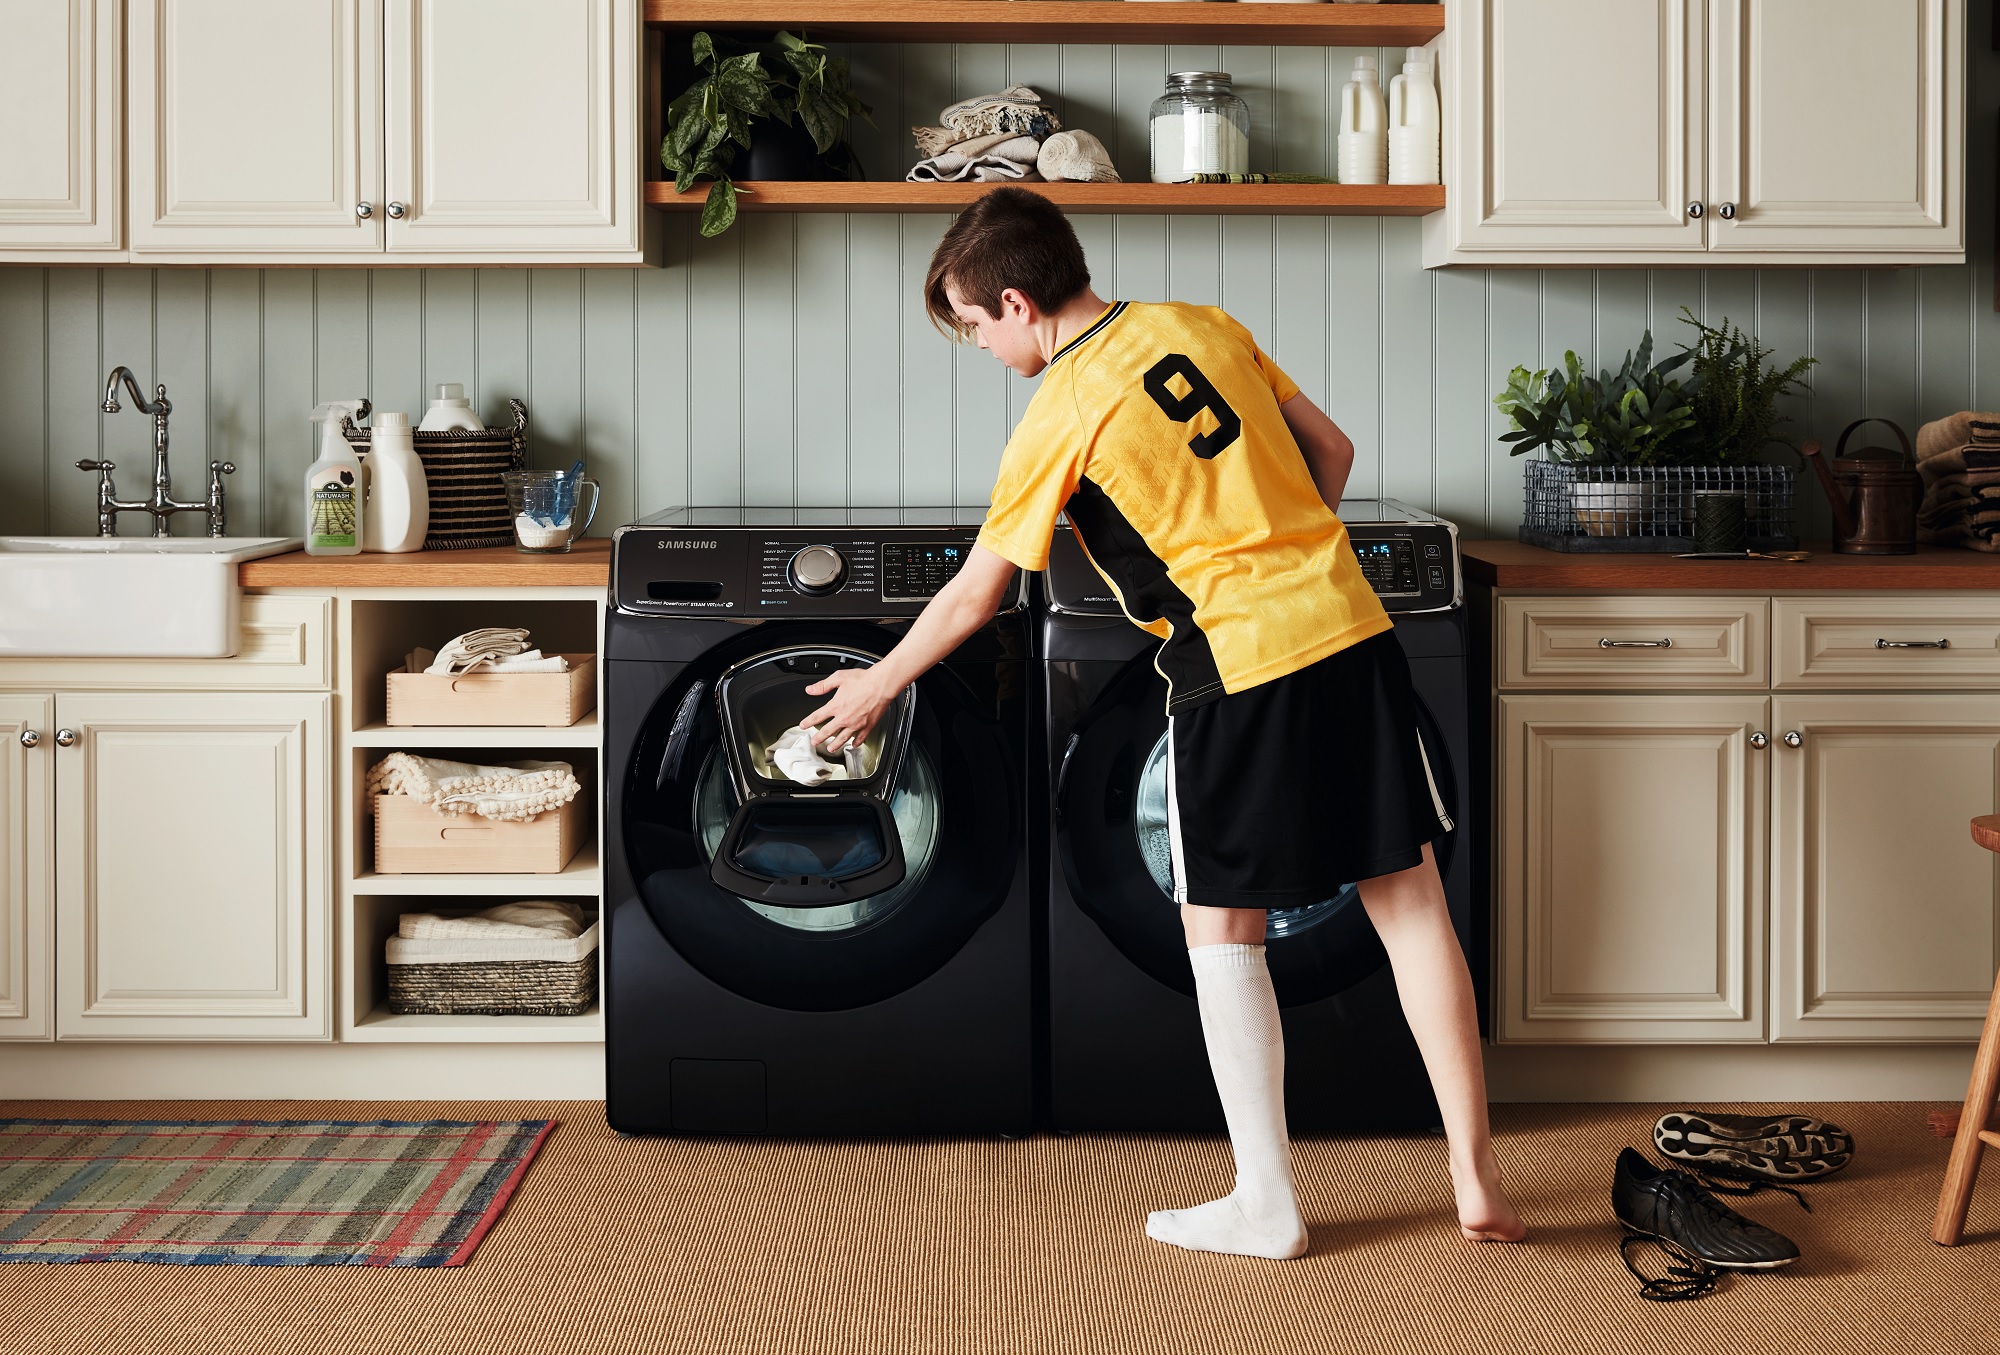 young boy in soccer uniform retrieves clothes from Samsung washer